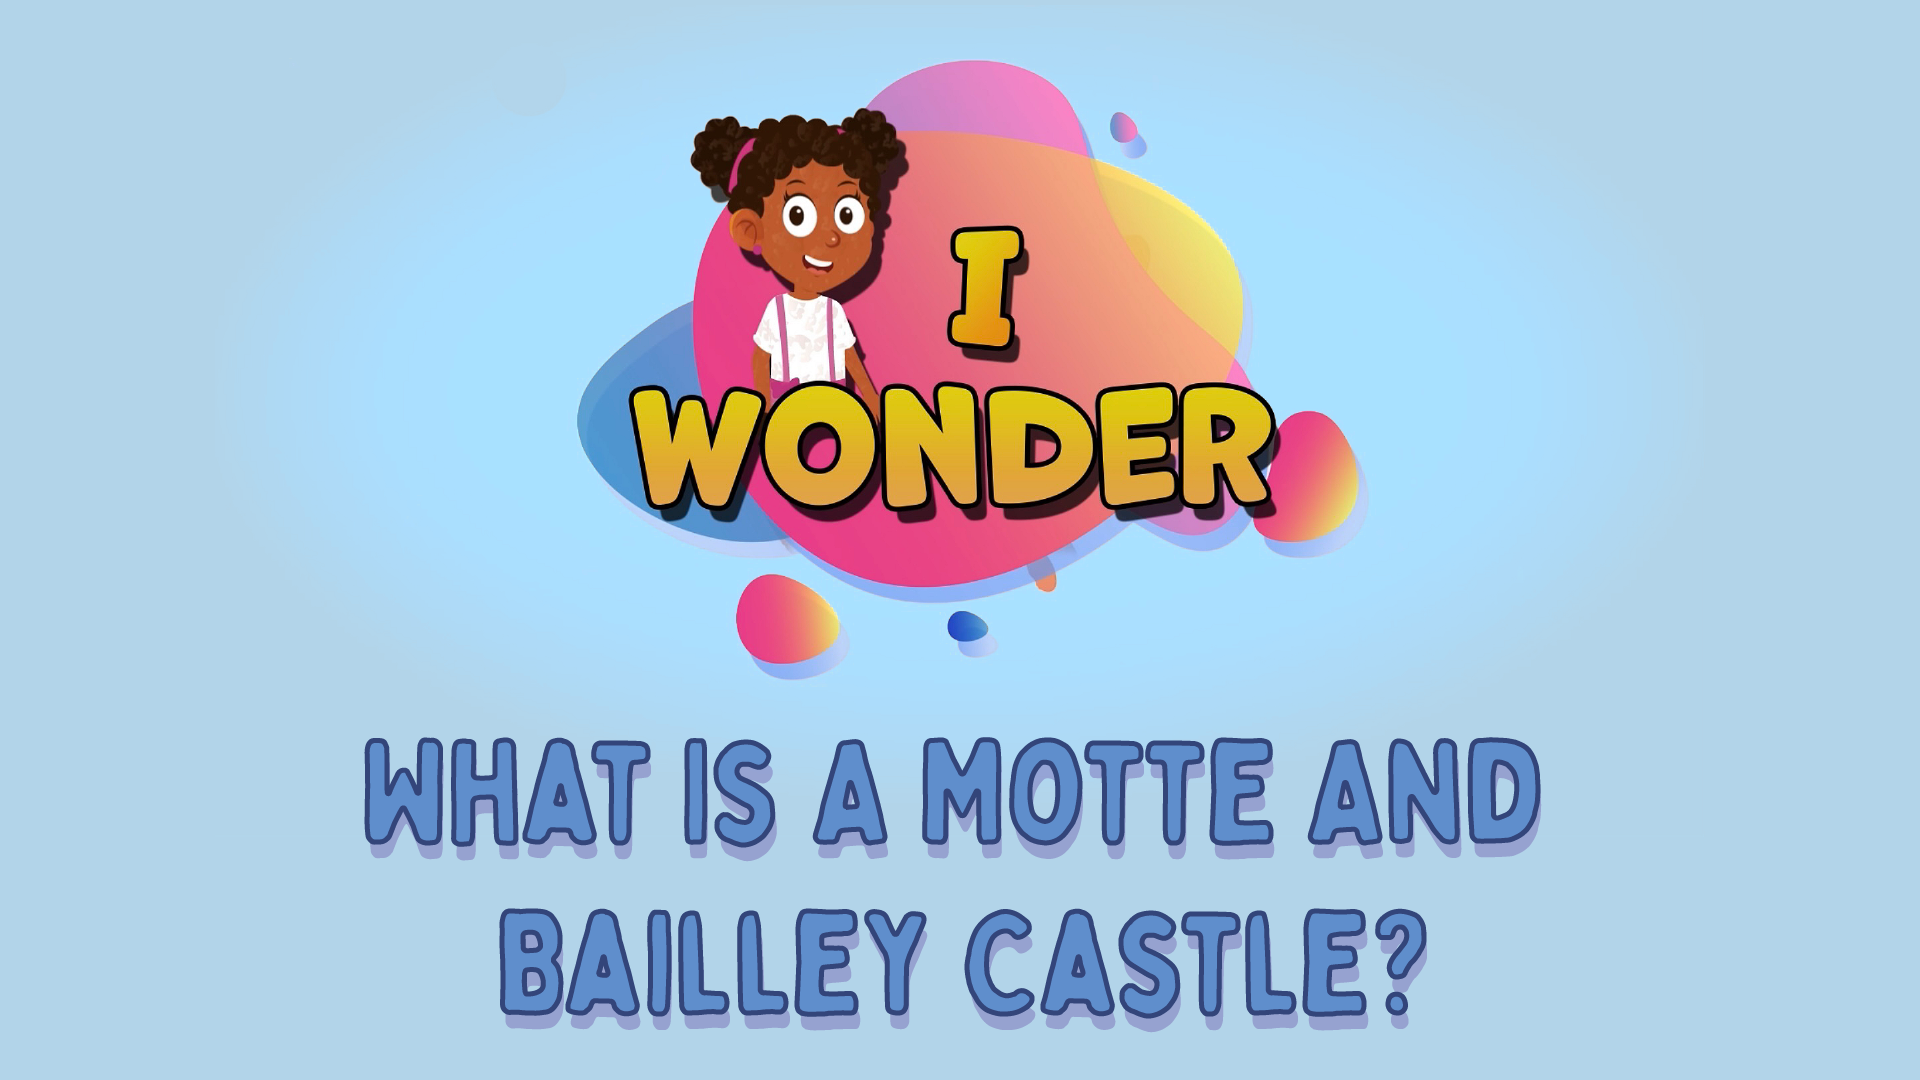 What Is A Motte And Bailley Castle?